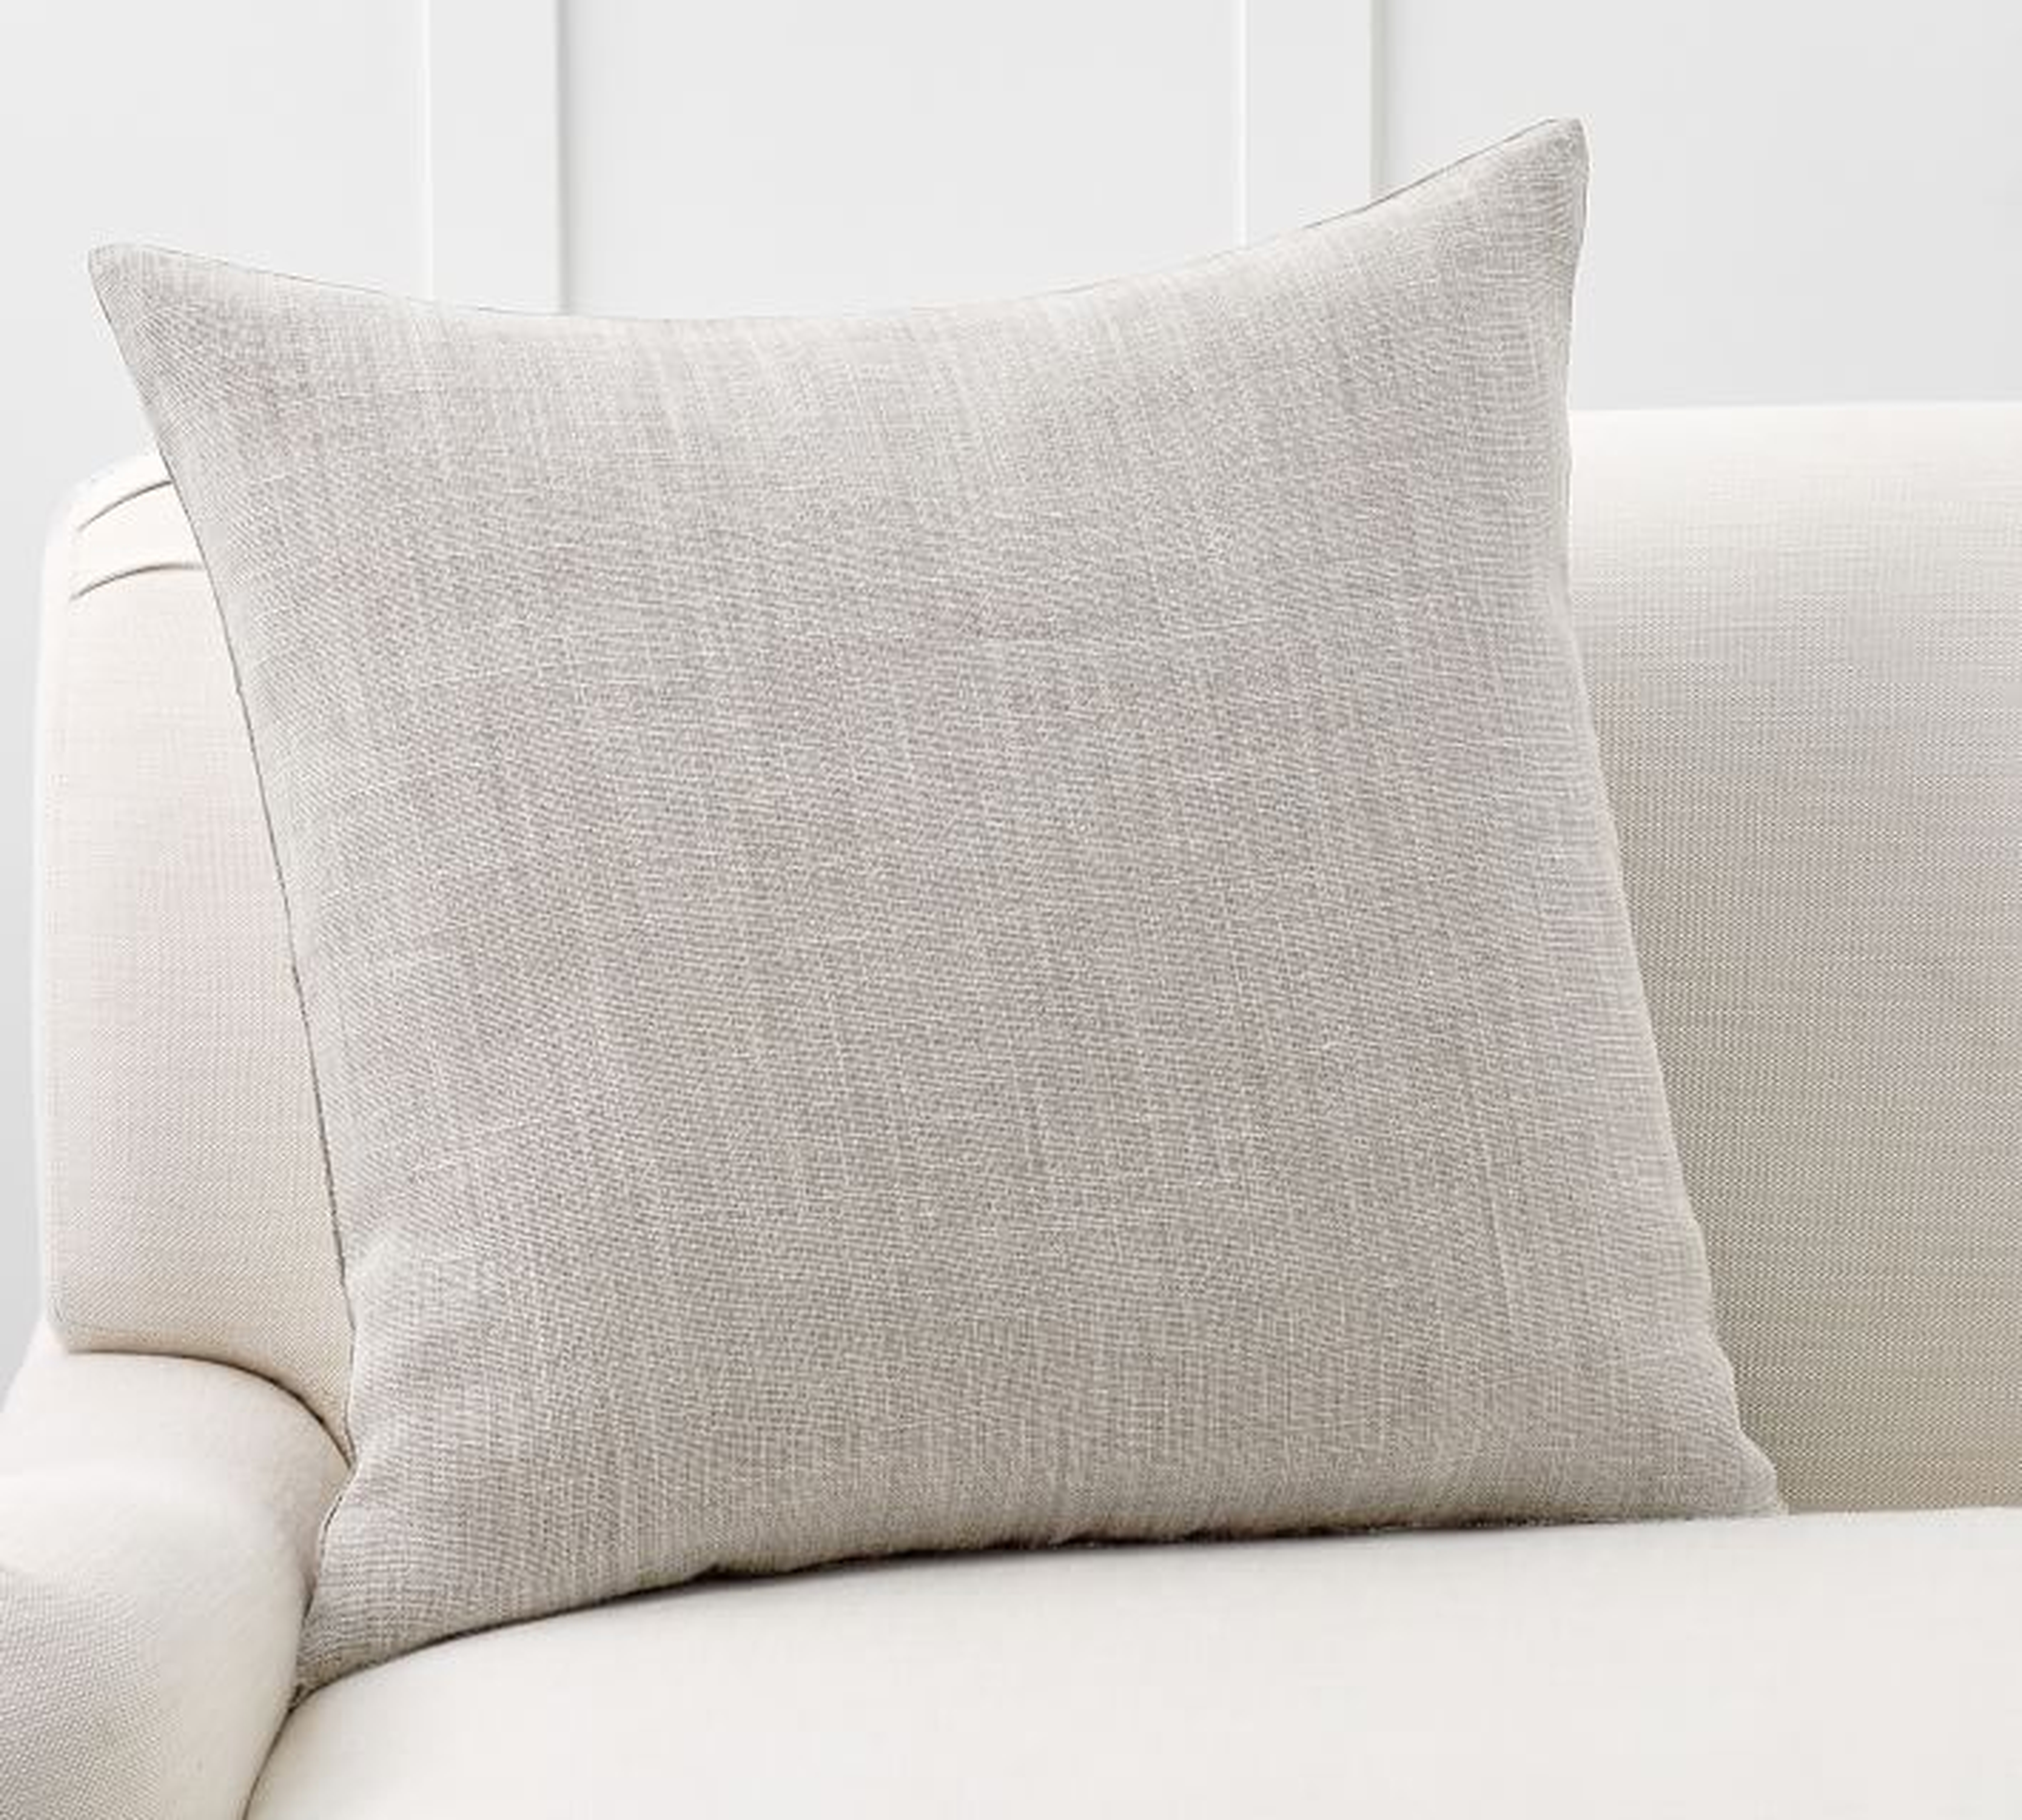 Libeco Linen Pillow Cover, 24", Pewter - Pottery Barn